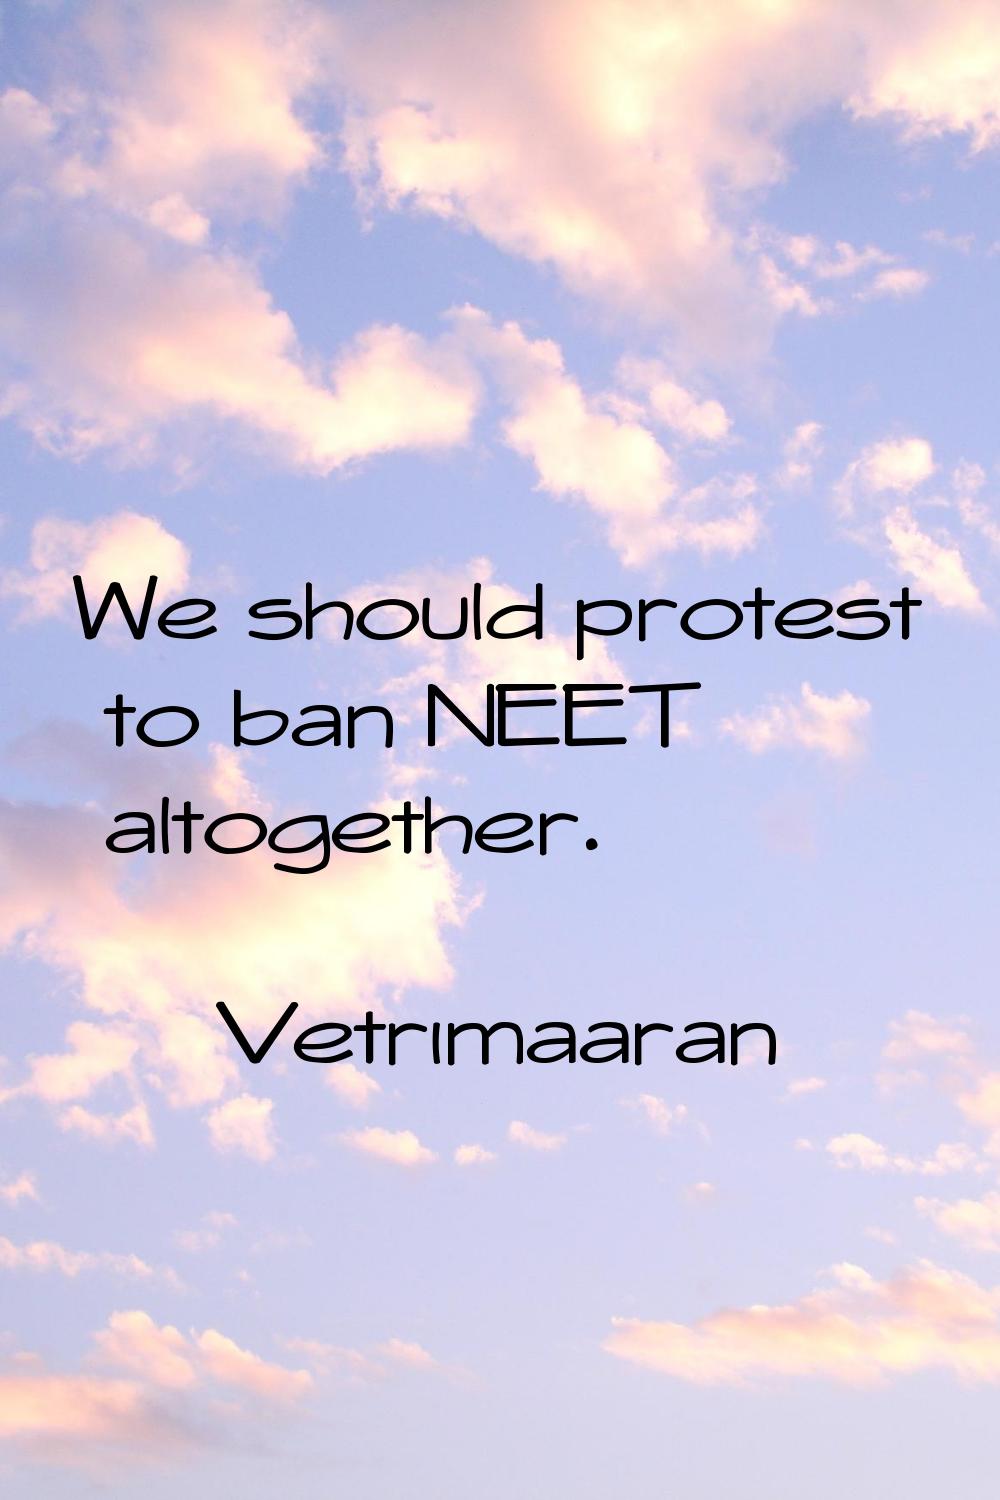 We should protest to ban NEET altogether.